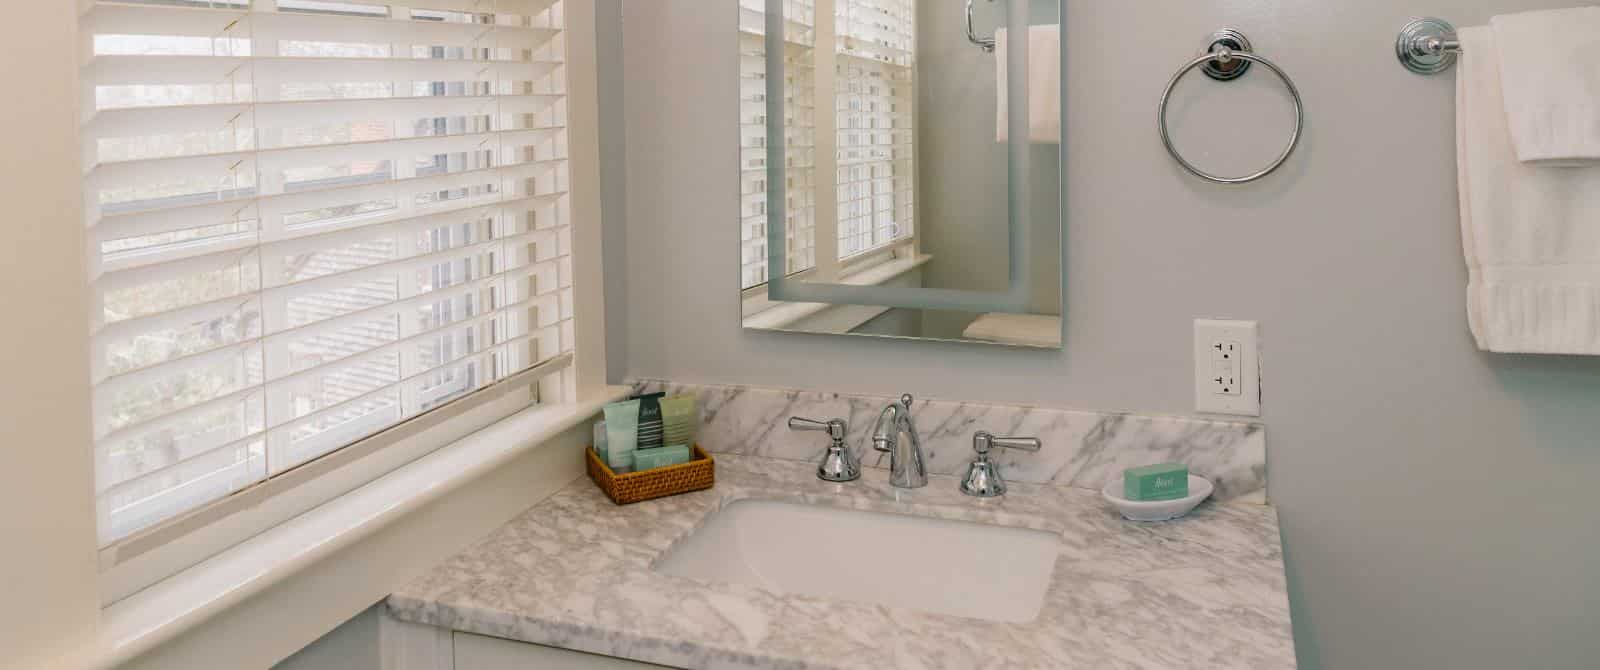 Bathroom with light colored walls, white vanity with marble top, and window with white blinds